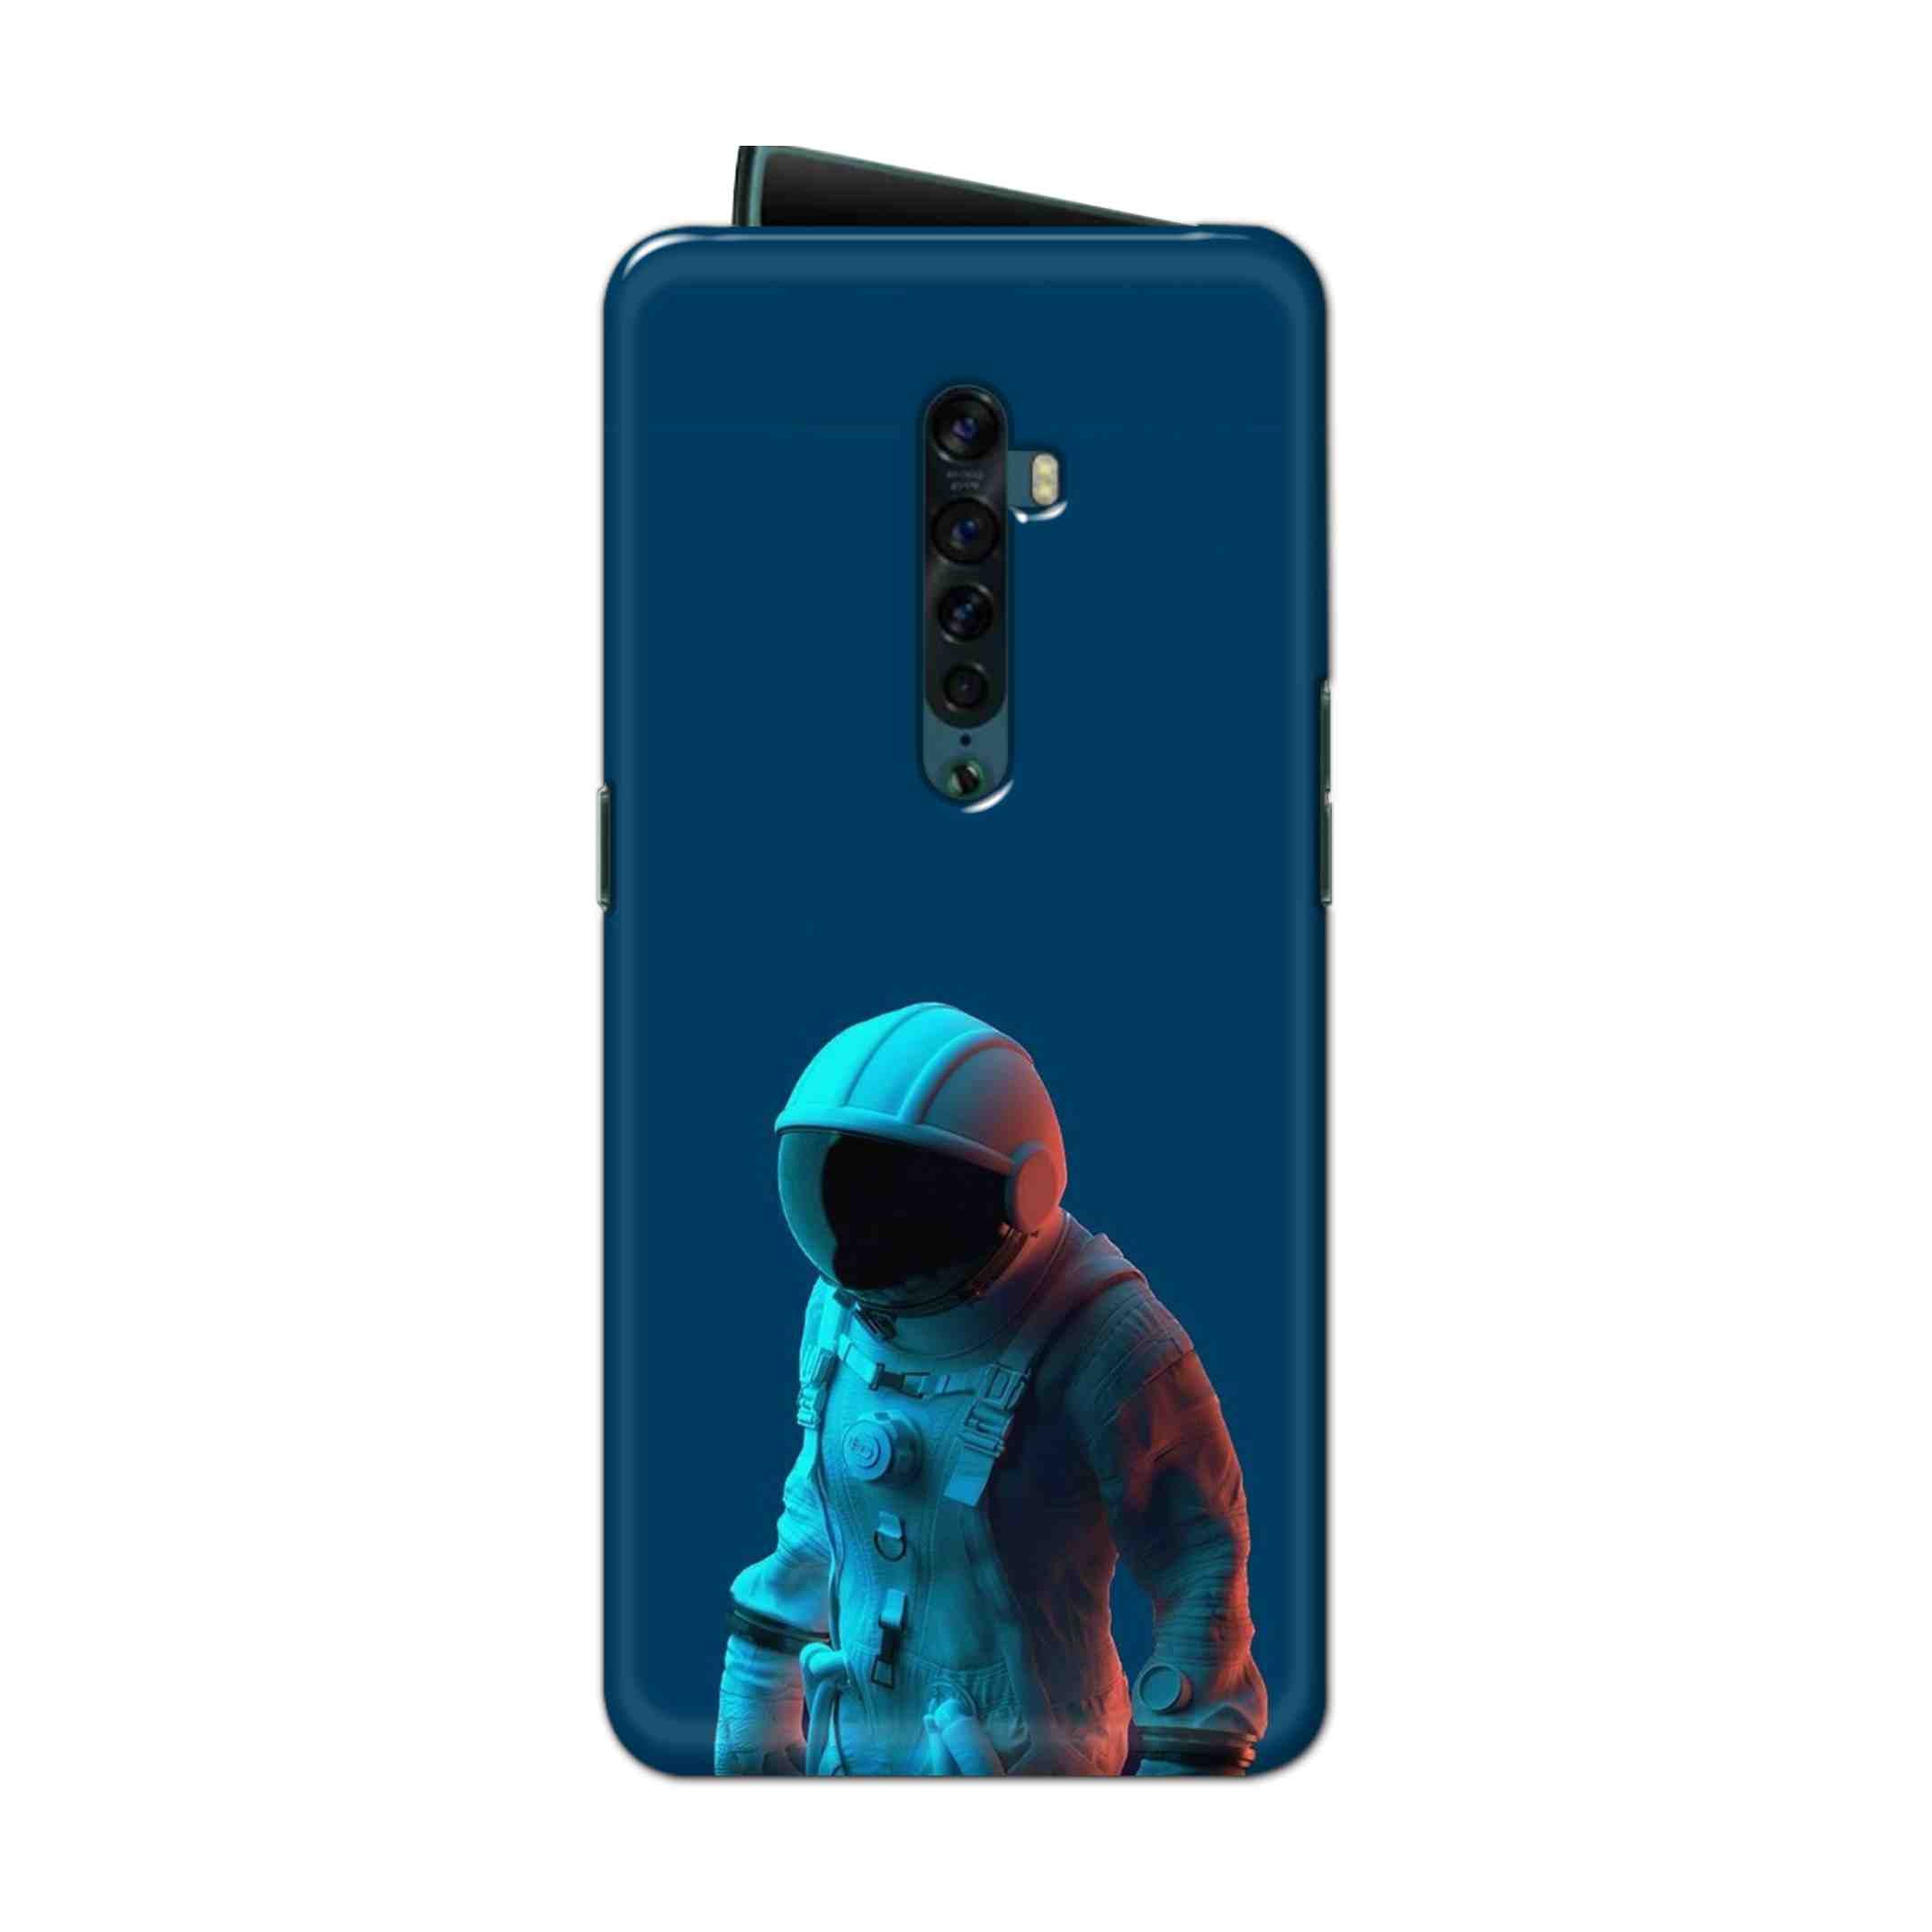 Buy Blue Astronaut Hard Back Mobile Phone Case Cover For Oppo Reno 2 Online